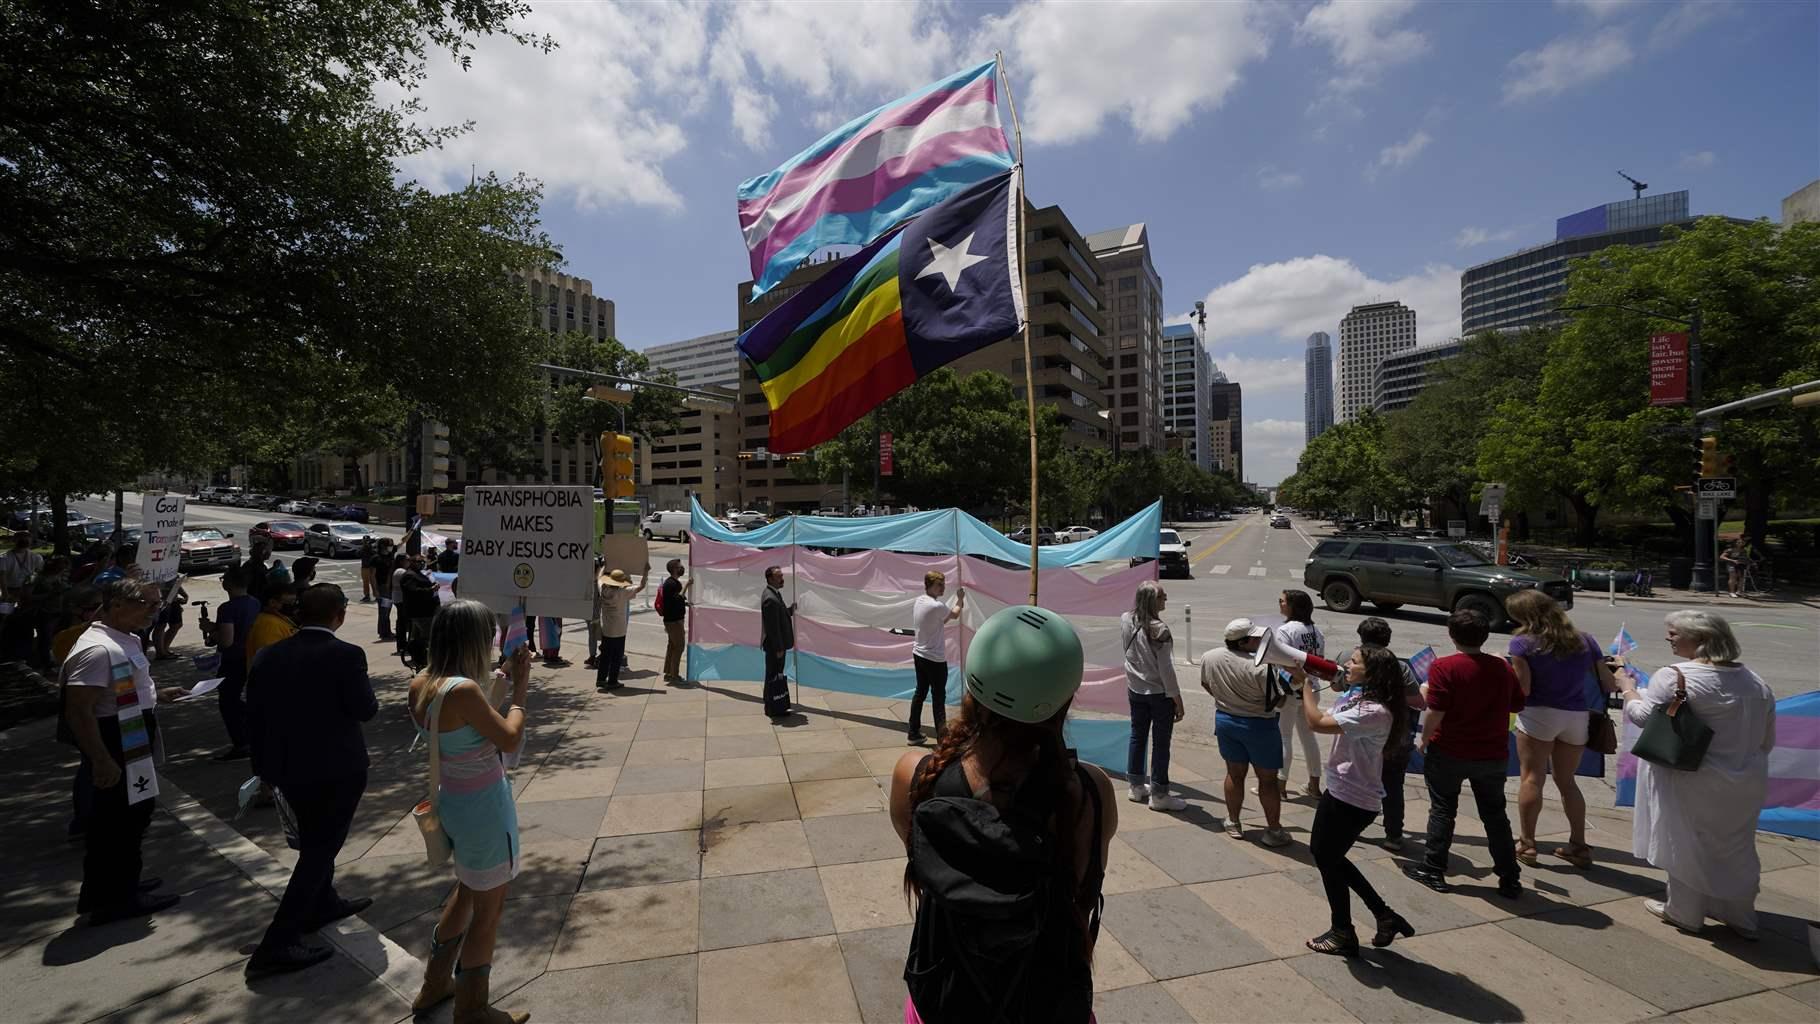 Demonstrators gather on the steps to the State Capitol to speak against transgender related legislation bills being considered in the Texas Senate and Texas House, Thursday, May 20, 2021, in Austin, Texas.